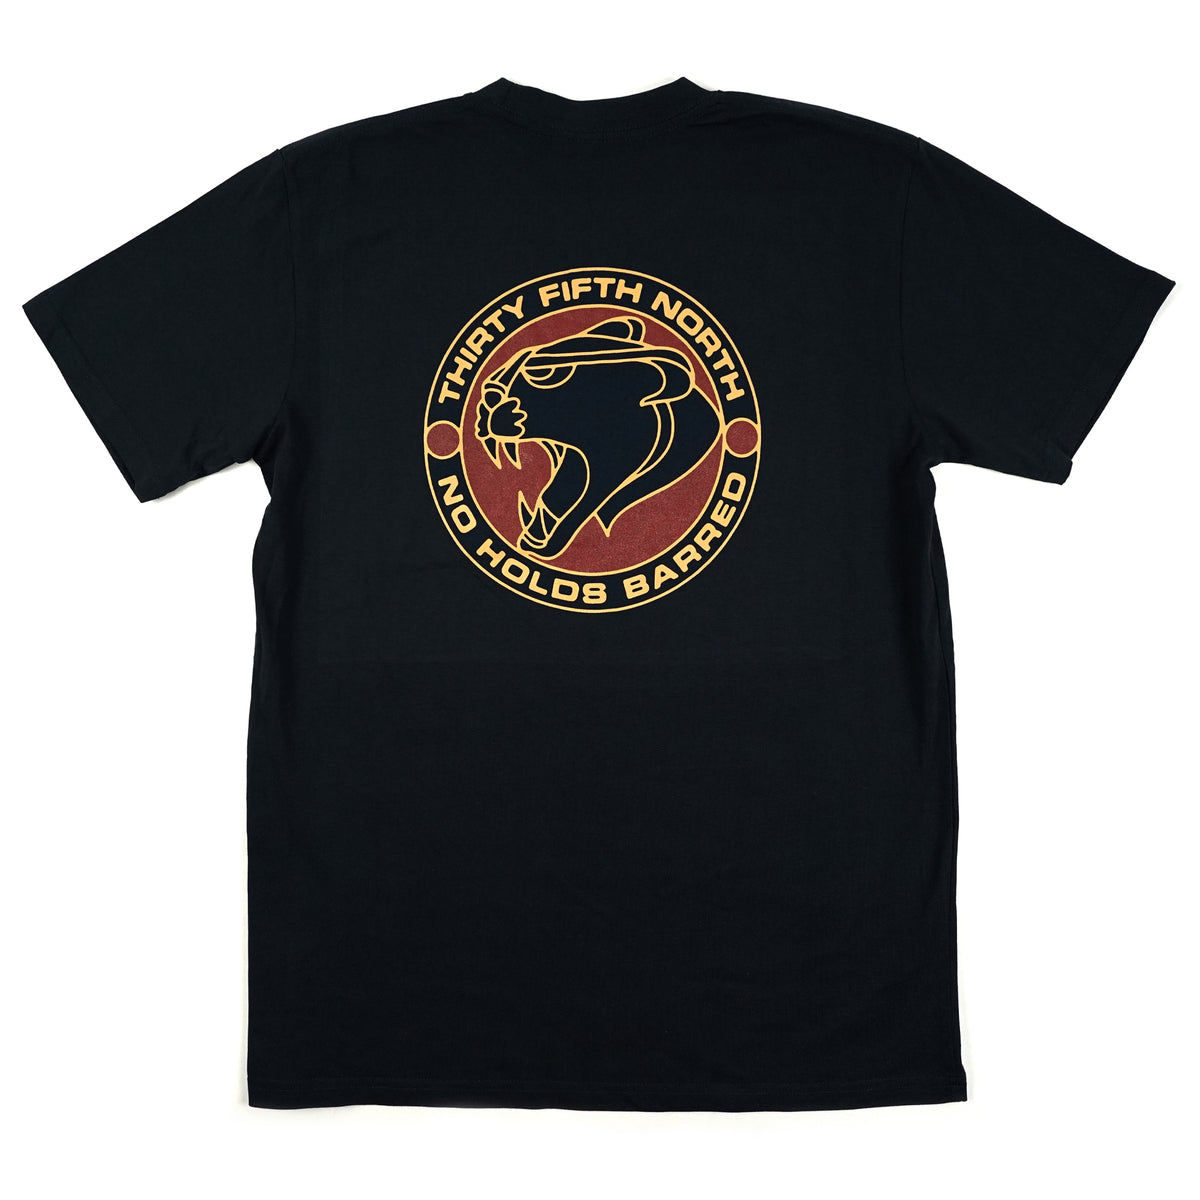 35th North ‘No Holds Barred’ T-Shirt - Black